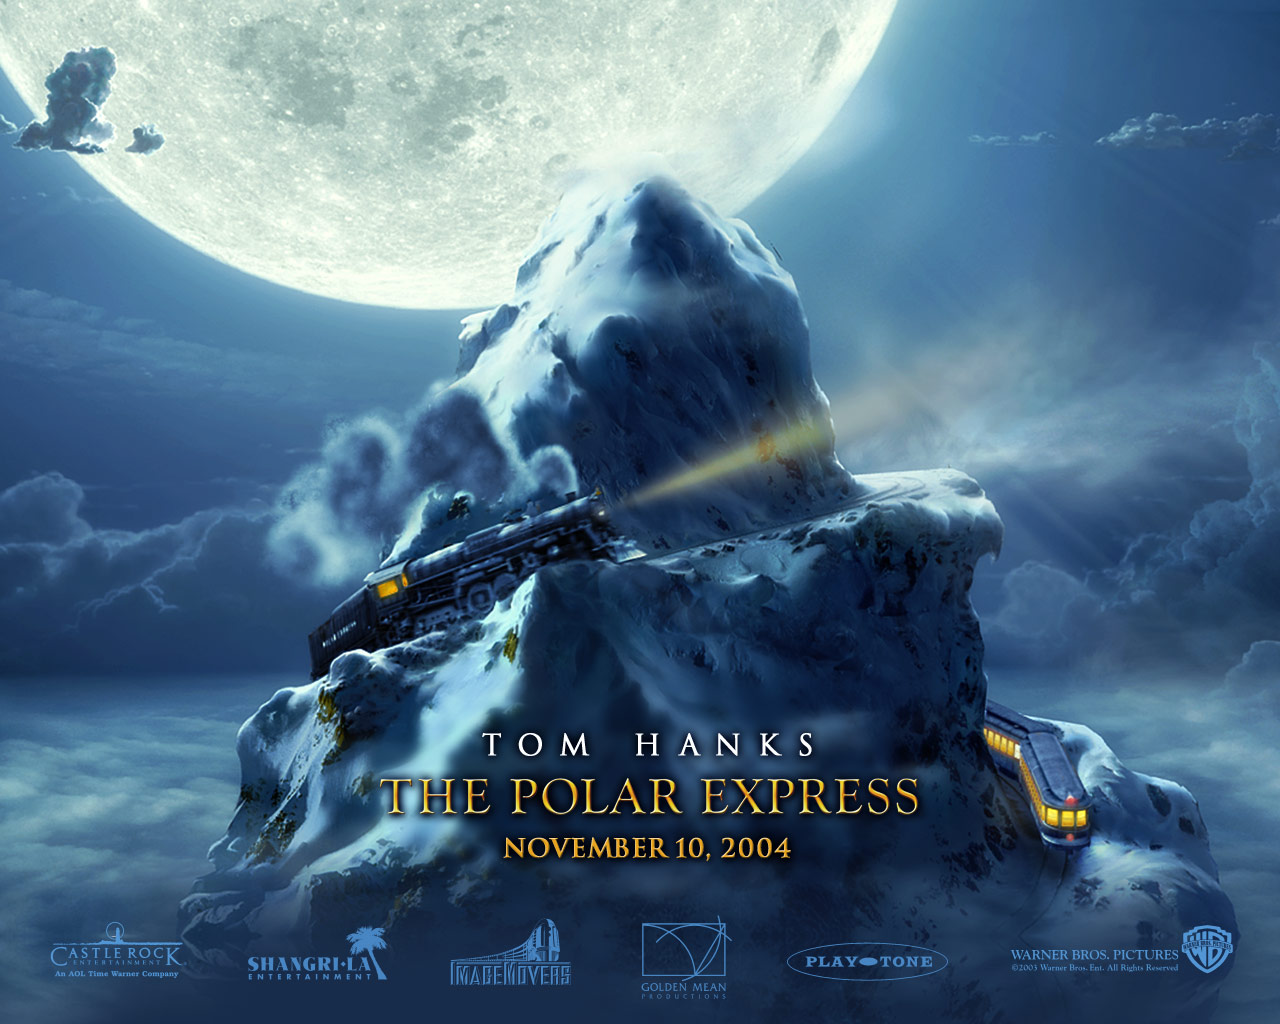 Download High quality The Polar Express wallpaper / Movies / 1280x1024